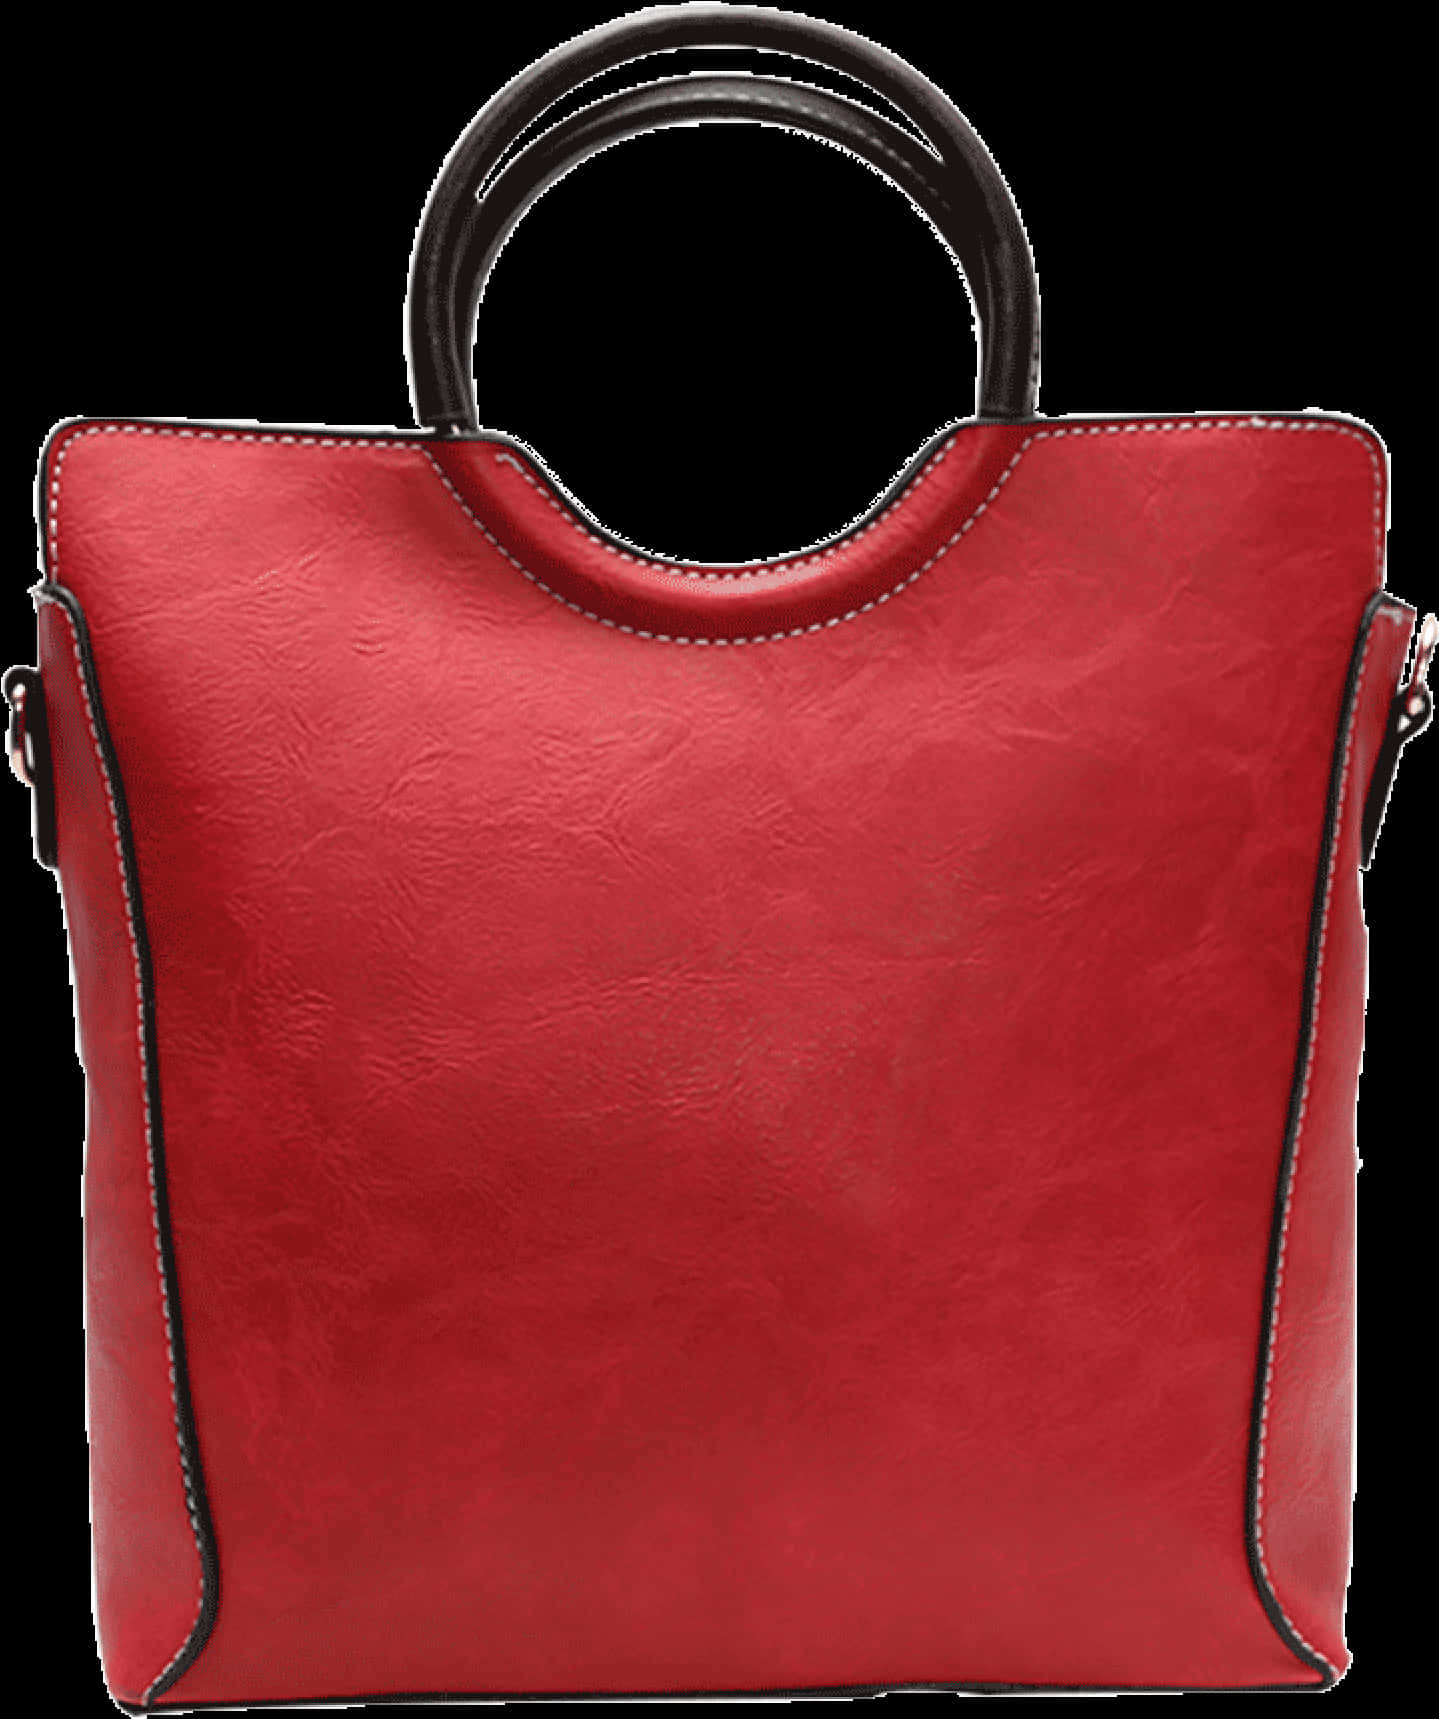 A Red Purse With Black Handles